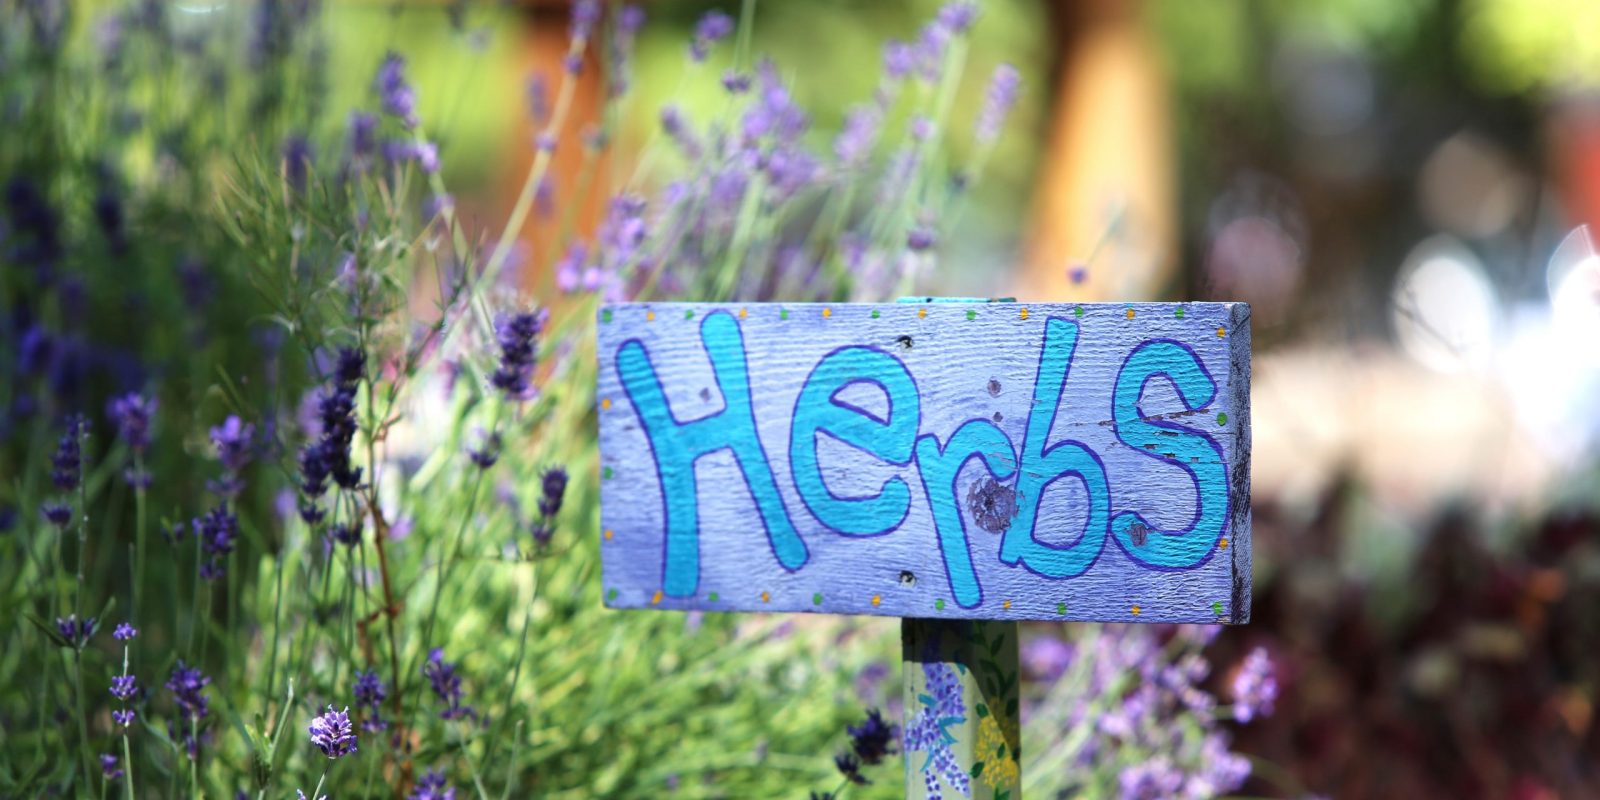 An image of a sign that says "Herbs" with a lavender plant growing to the left of it